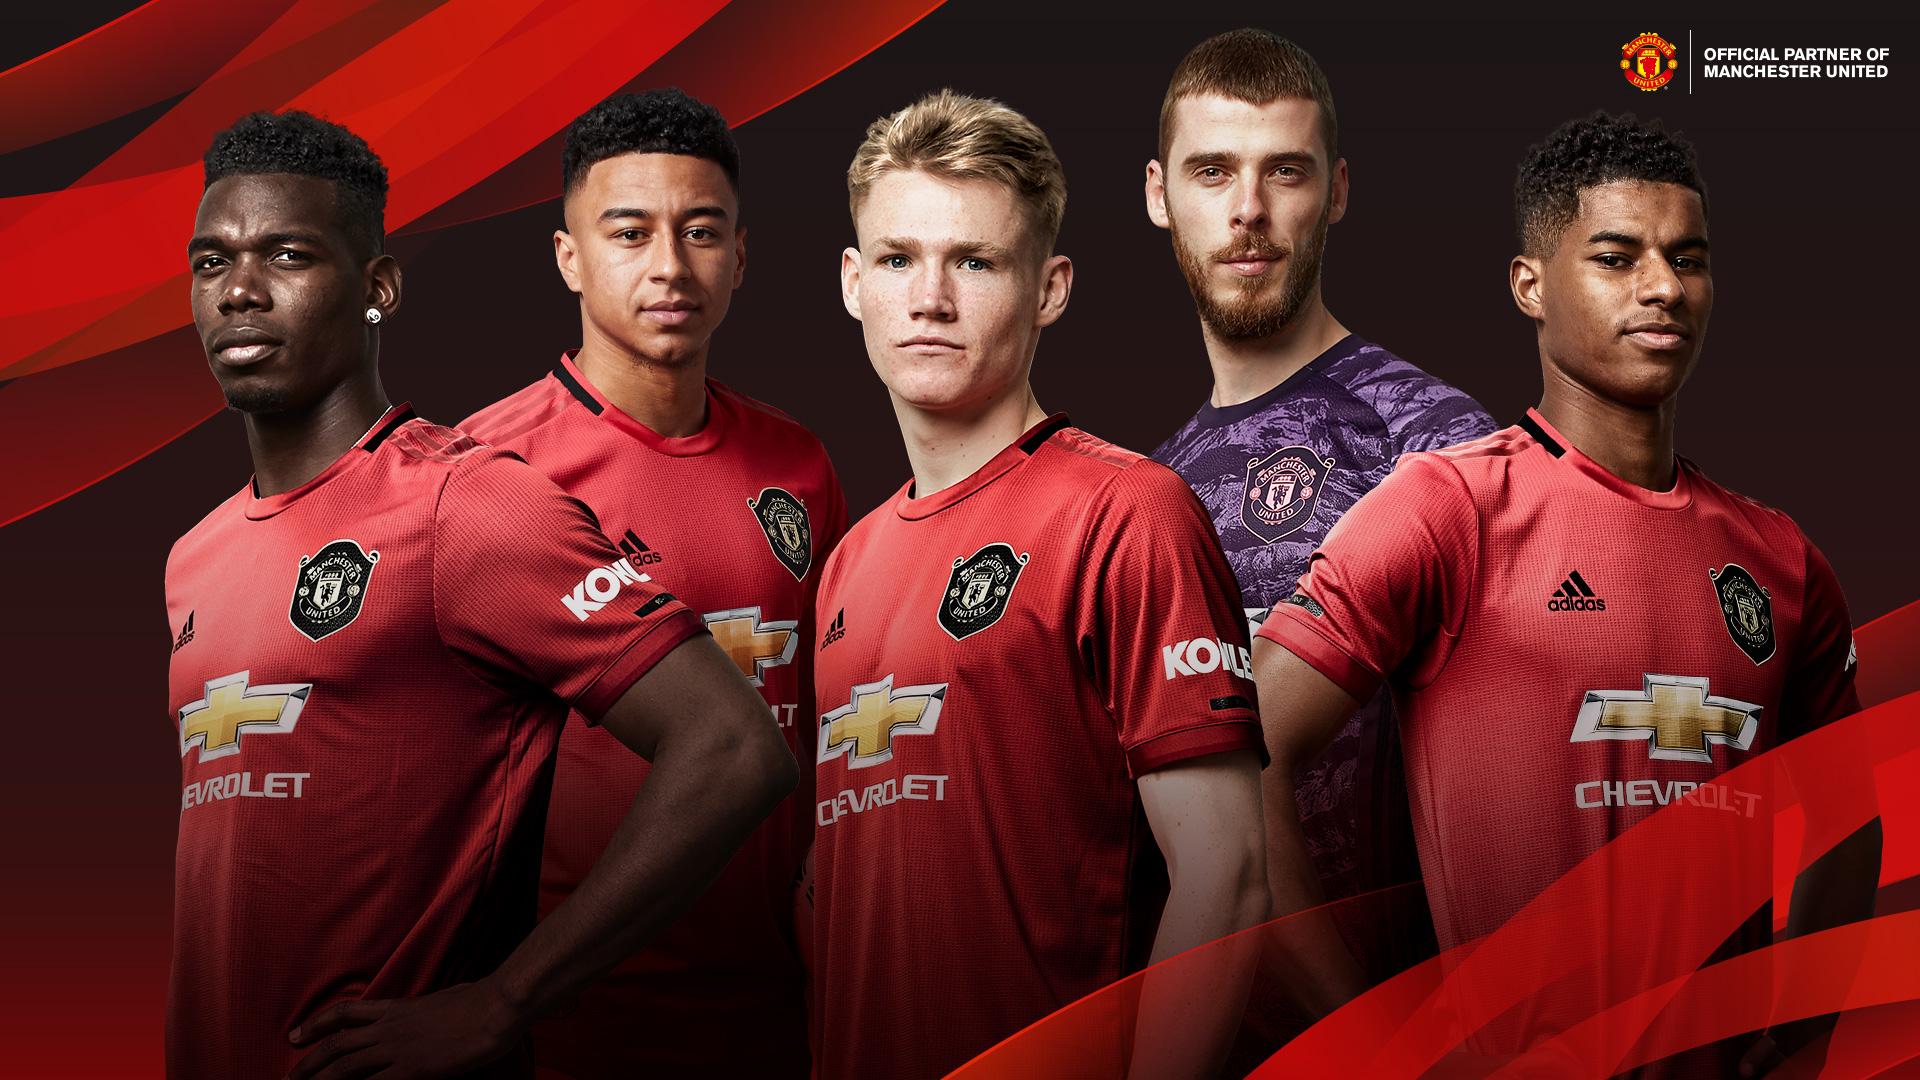 [42+] Manchester United 2021 Wallpapers on WallpaperSafari